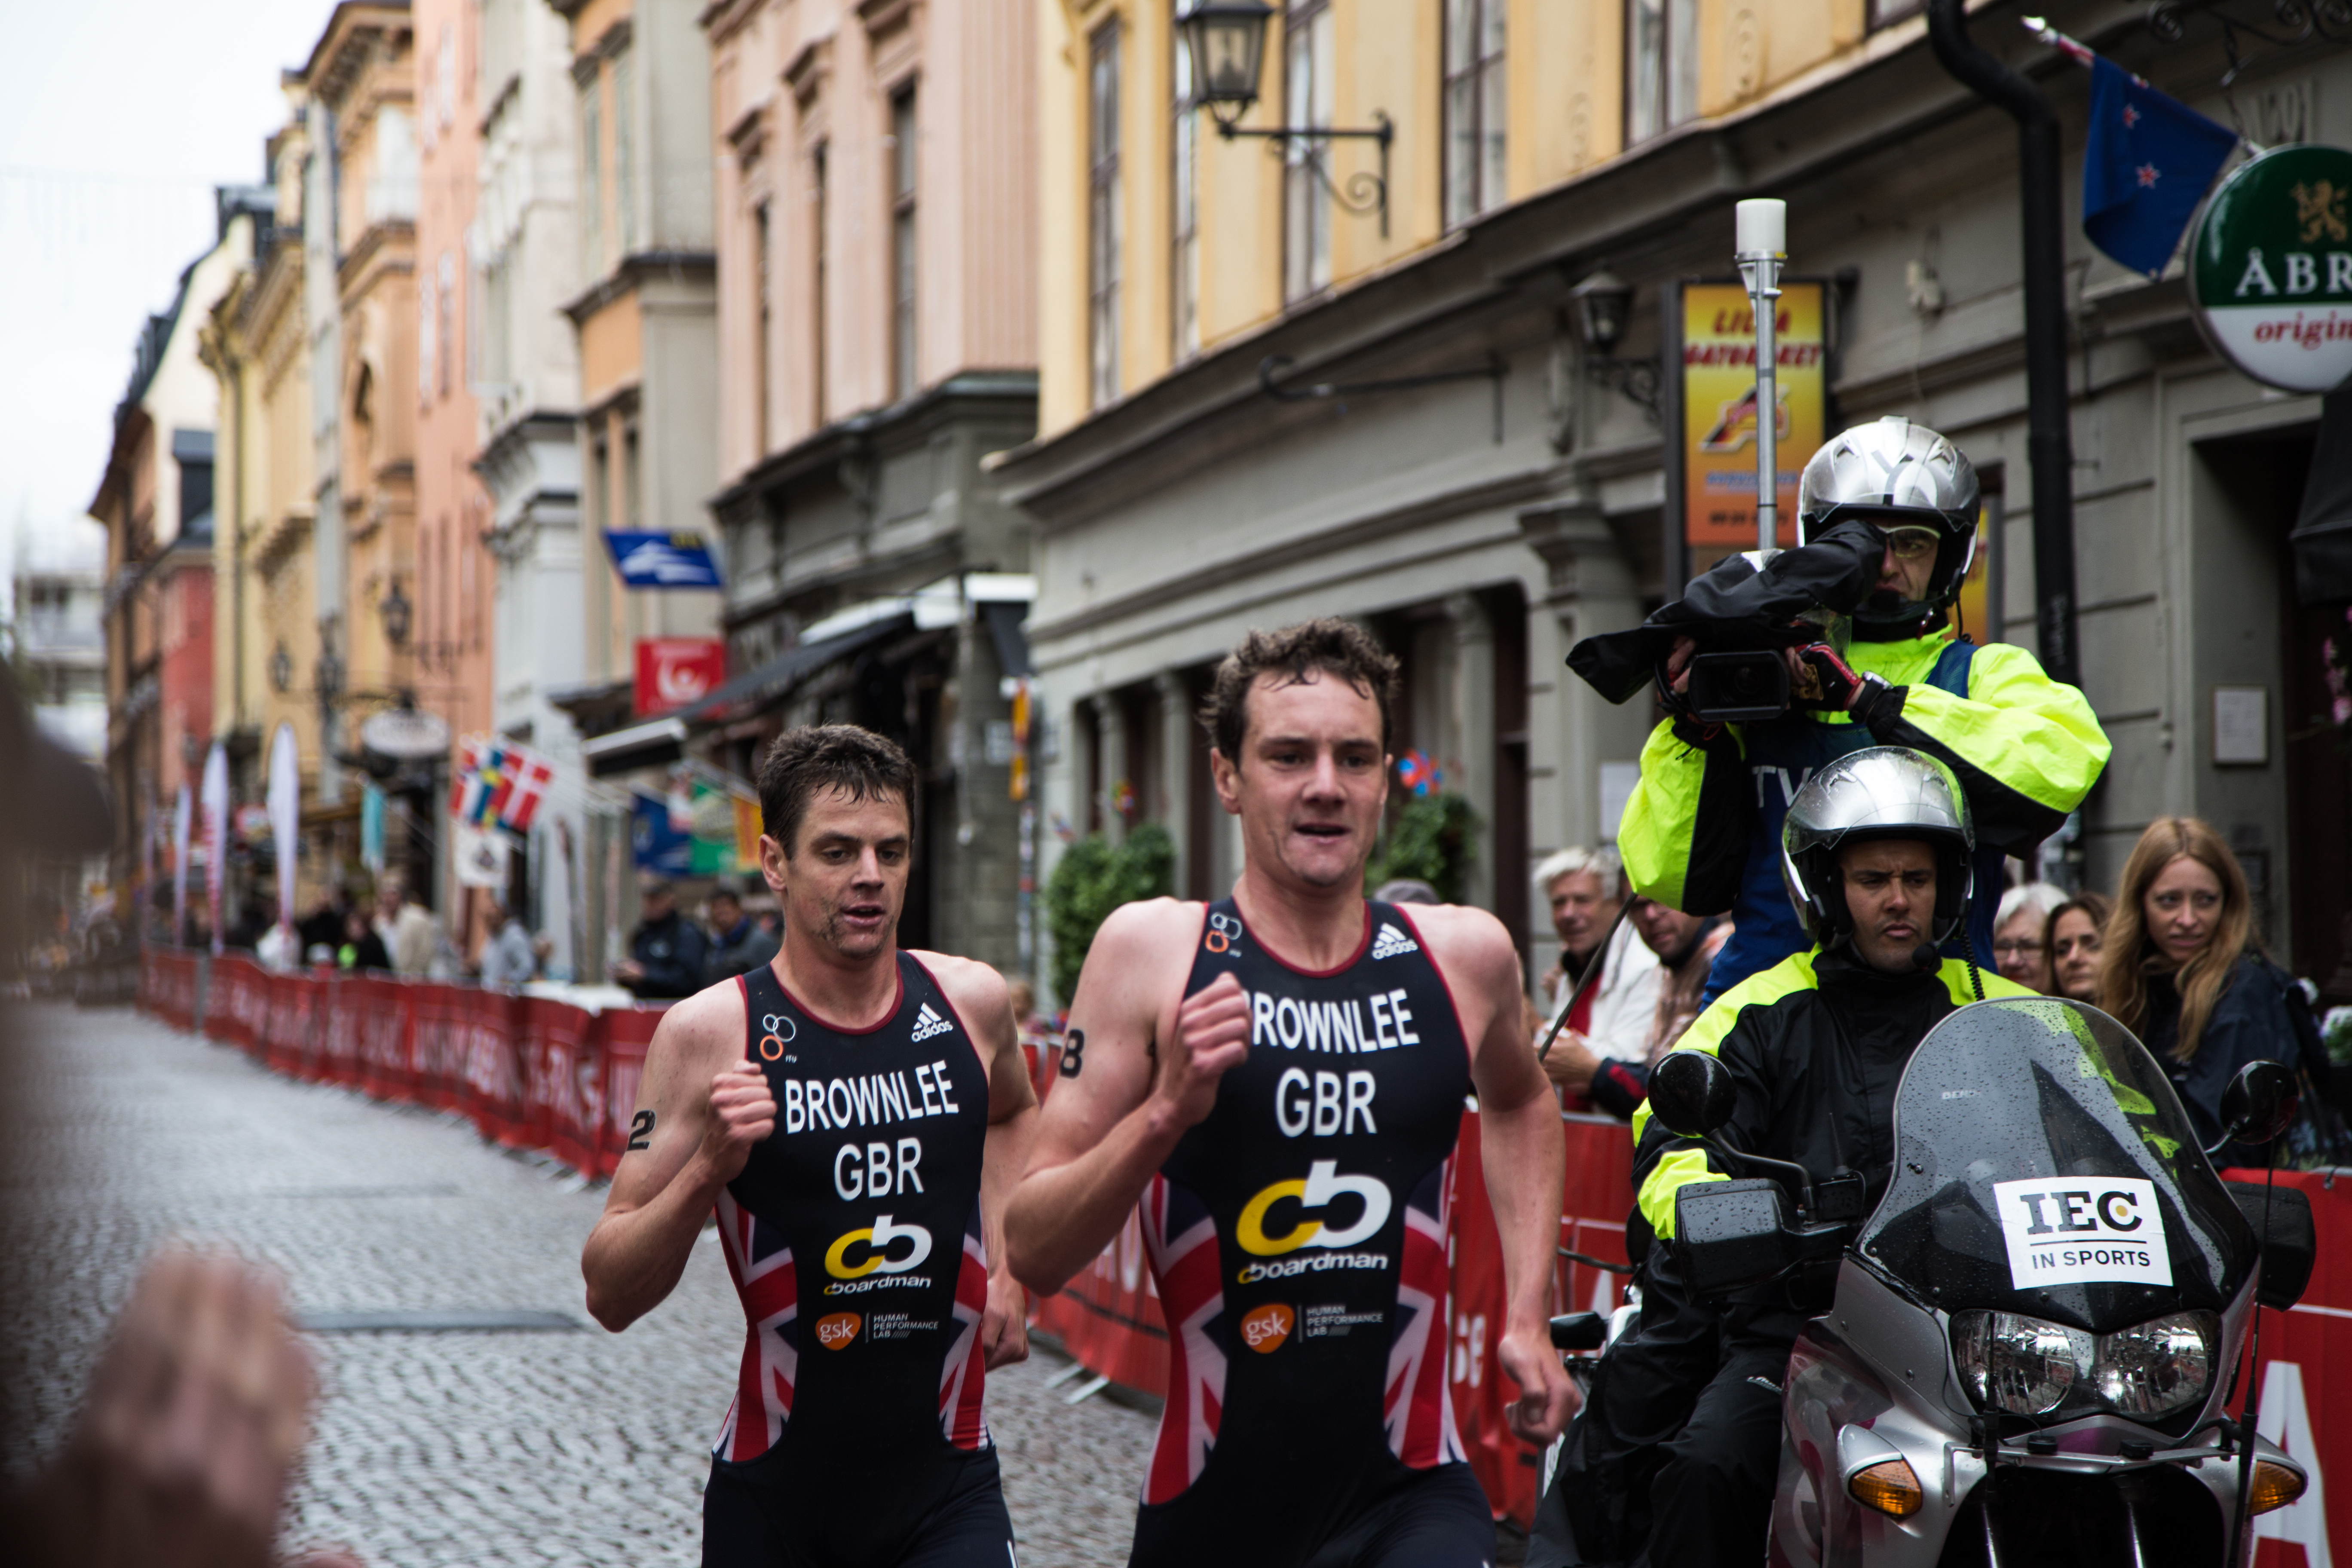 The brownlee brothers photo